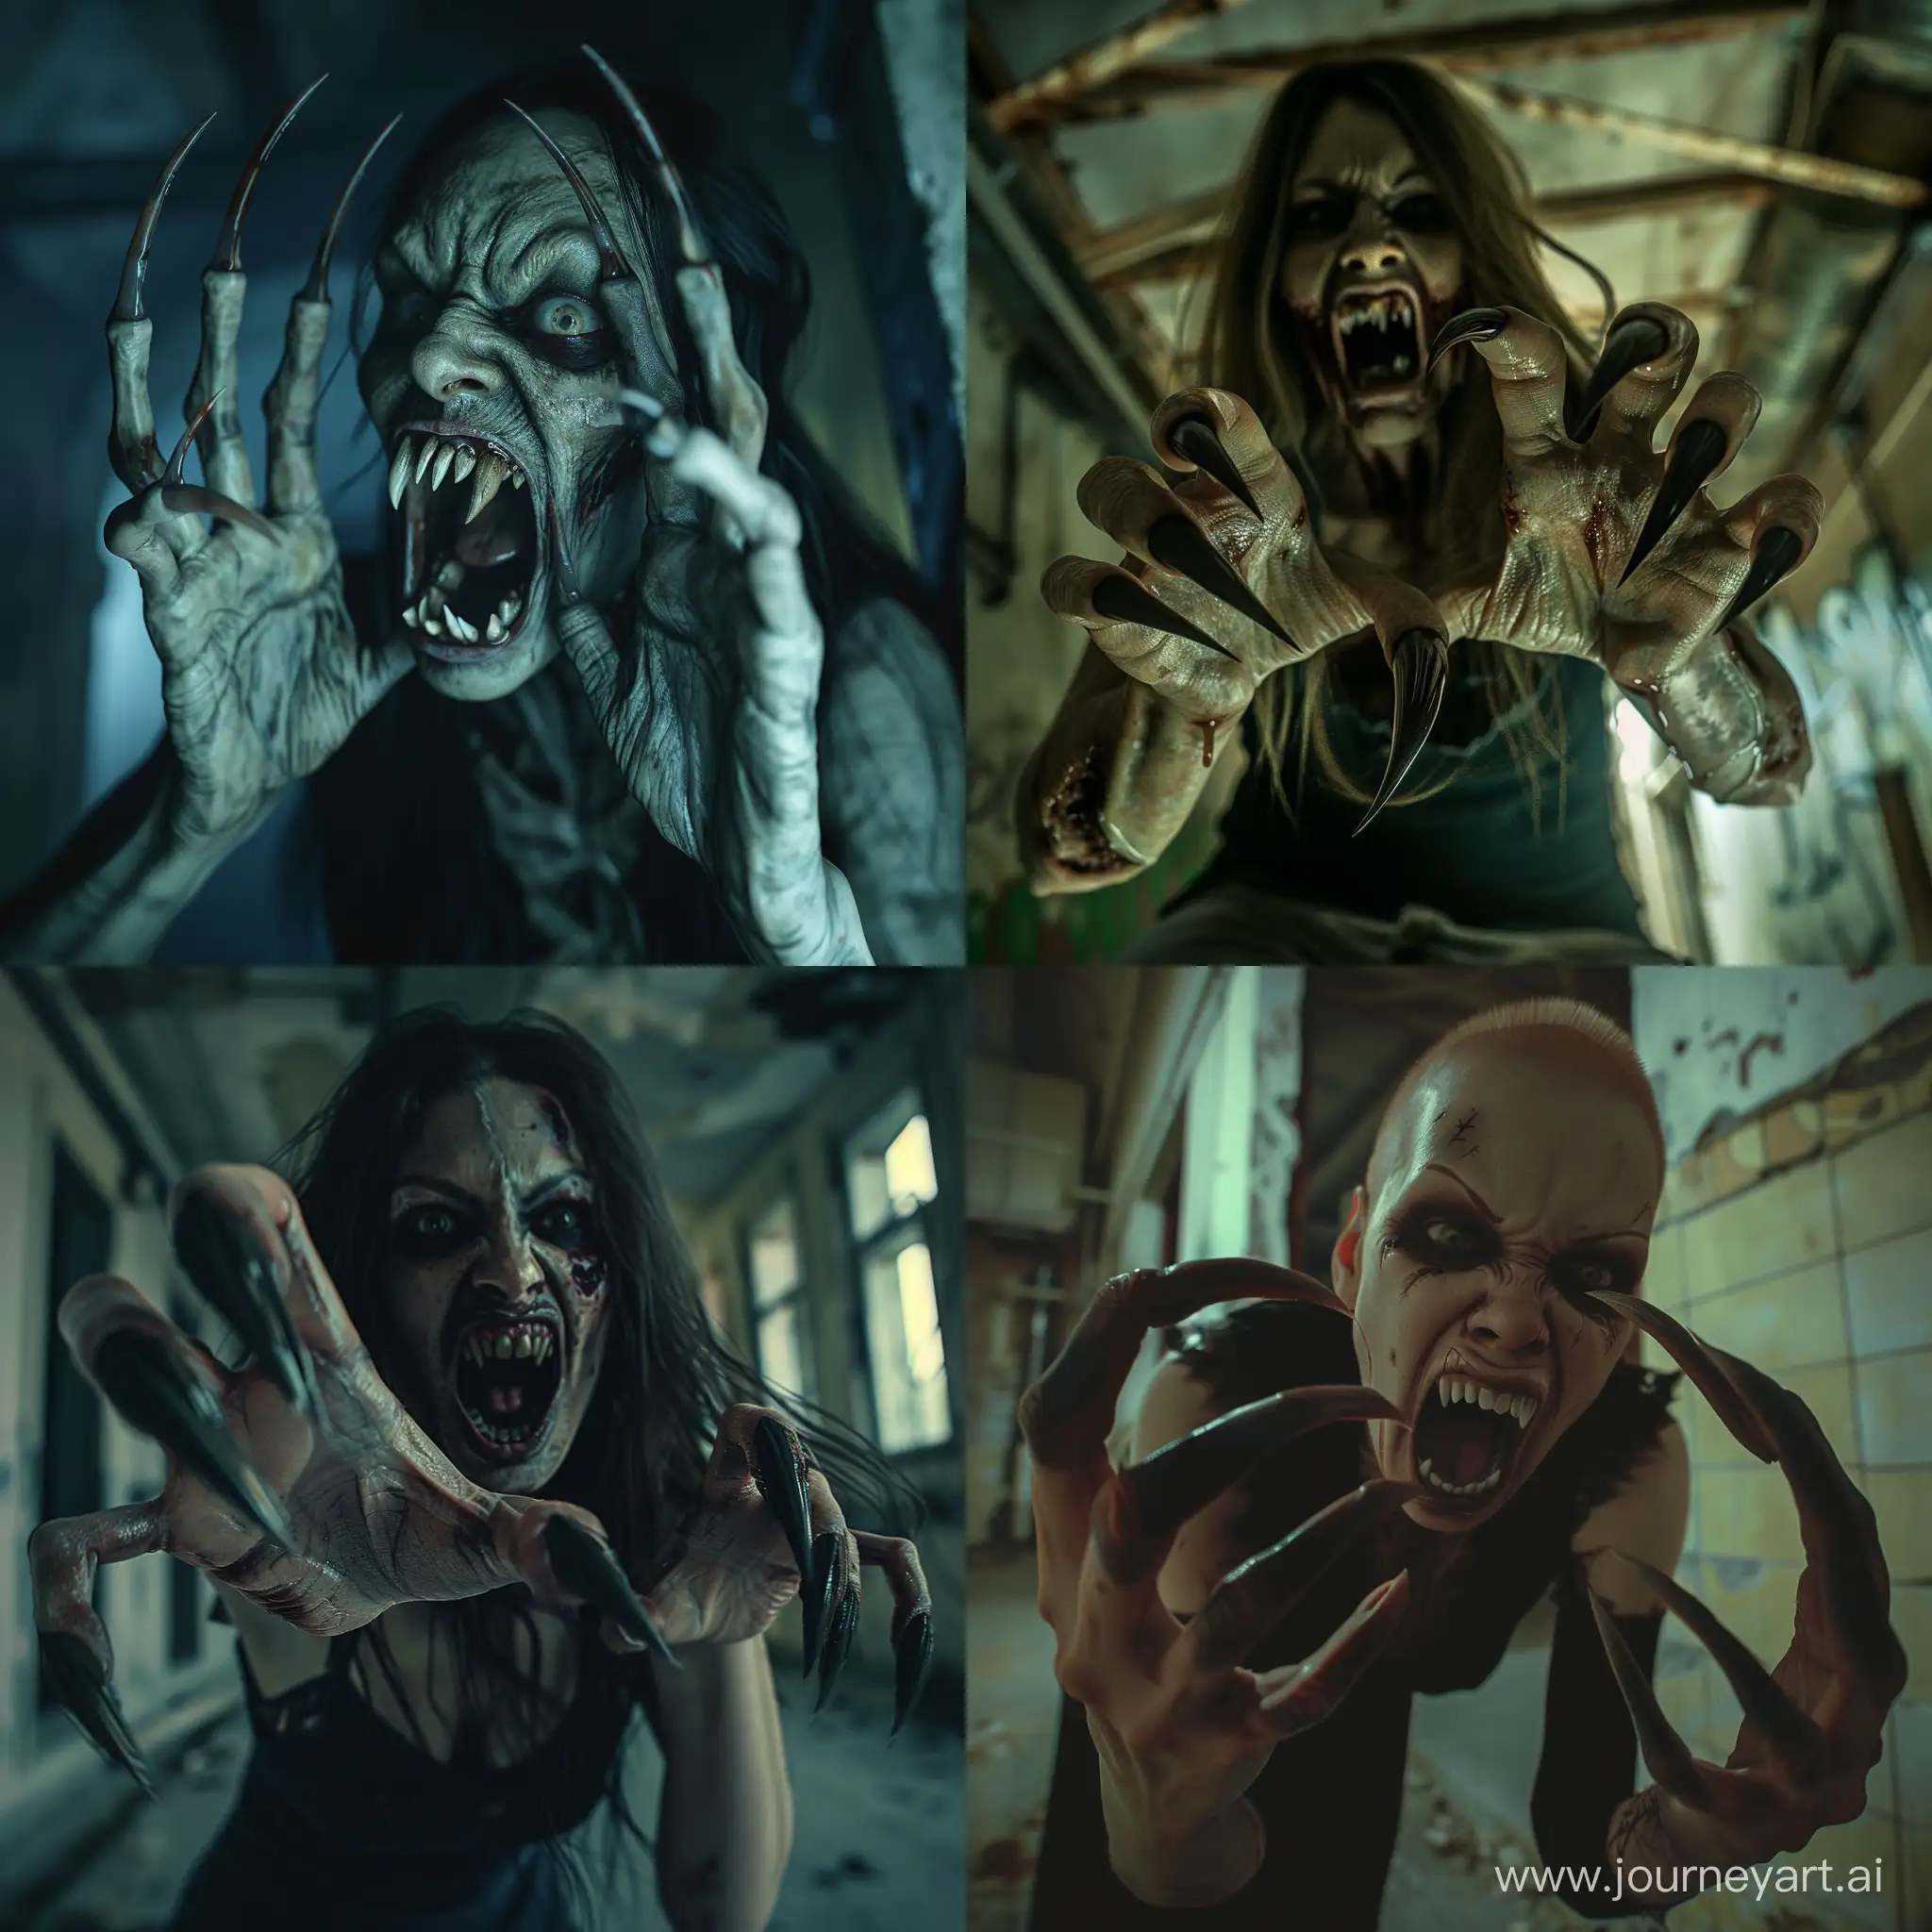 A Terrible Zombie woman with long curved pointed nails protruding from her fingers like menacing claws, she looks like a who has climbed out of the grave, her mouth is threateningly open exposing pointed teeth resembling fangs, The scene takes place at night, in an abandoned building, hyper-realism, photorealistic, cinematic, high detailed, nails detailed, detailed photo.